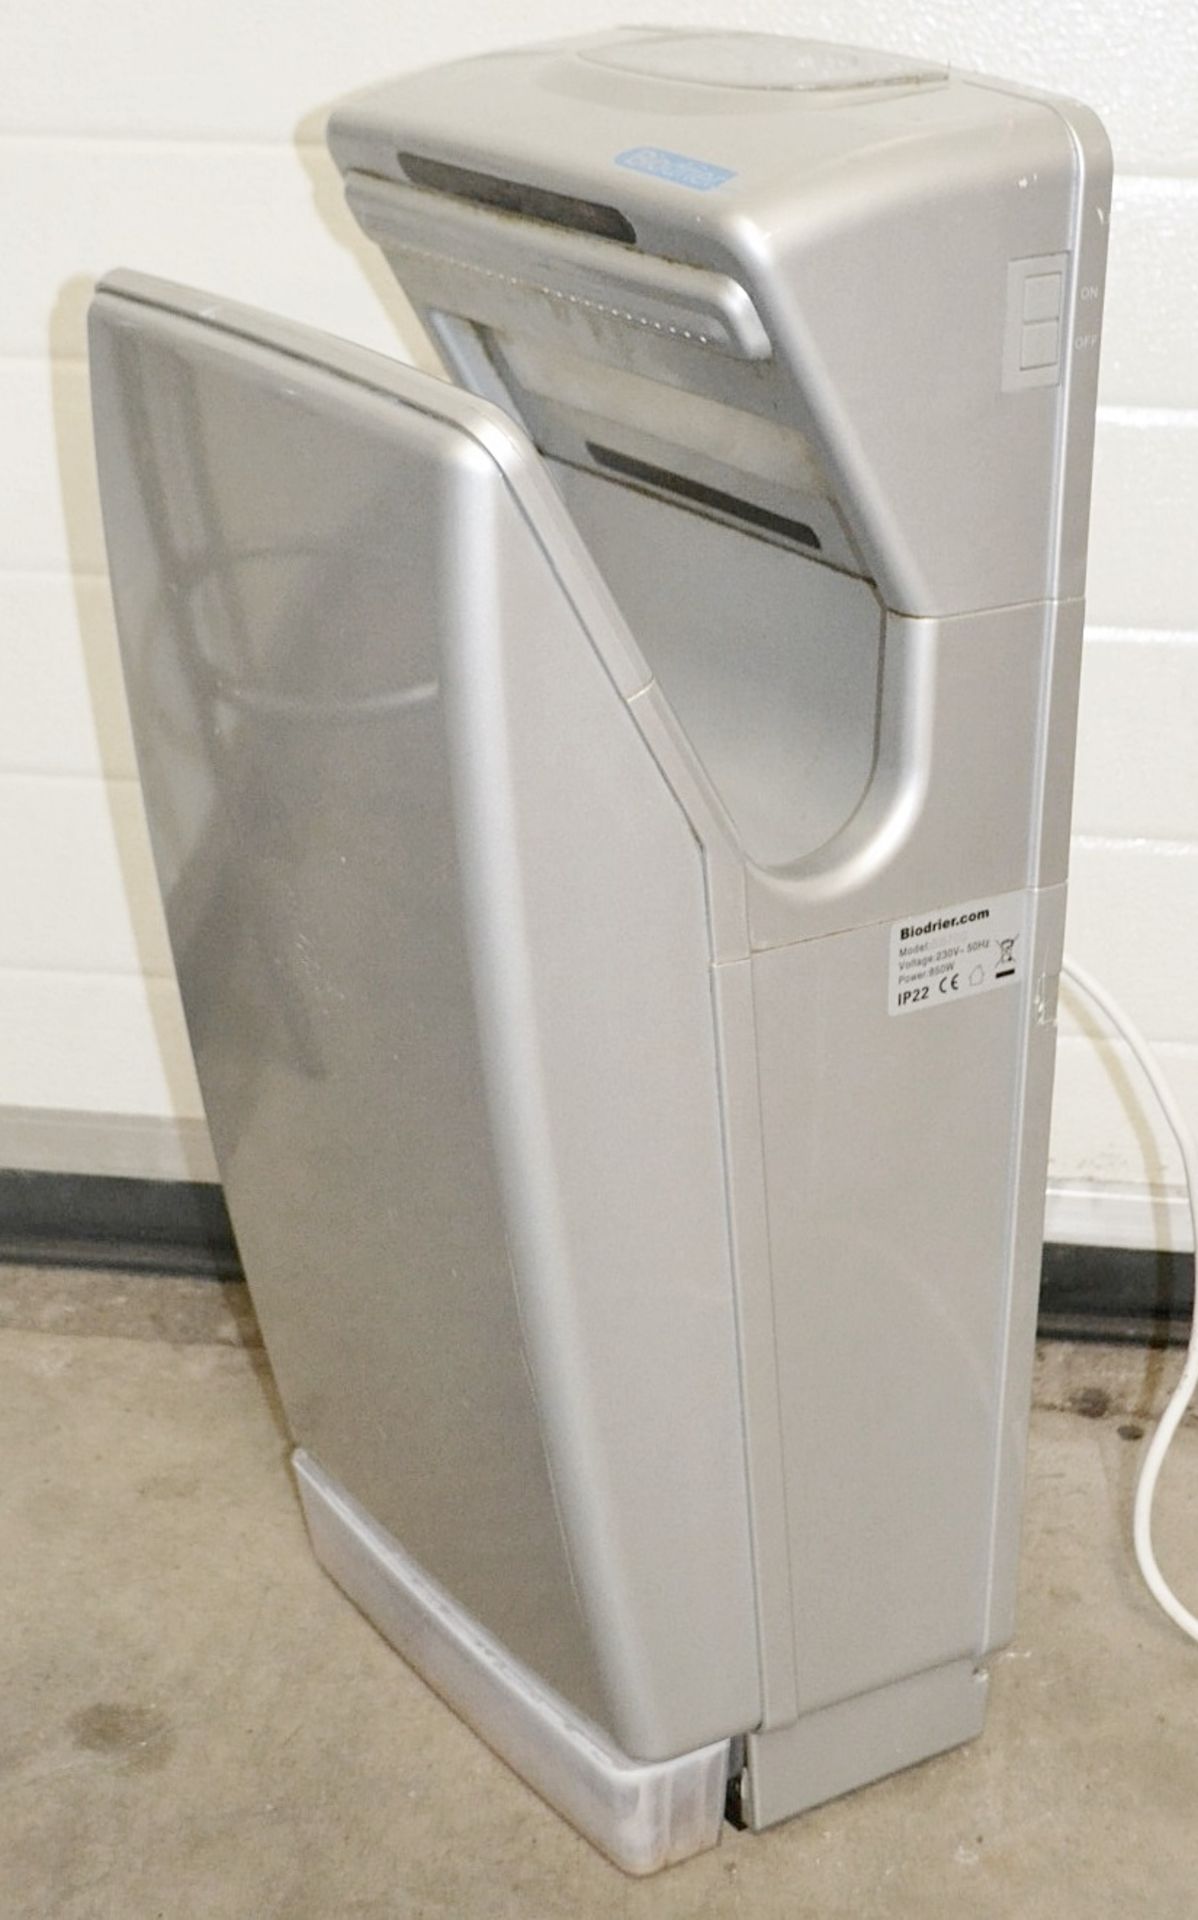 1 x BIODRIER Business Automatic Hand Dryer In Silver - Model: BB70S - Image 5 of 9